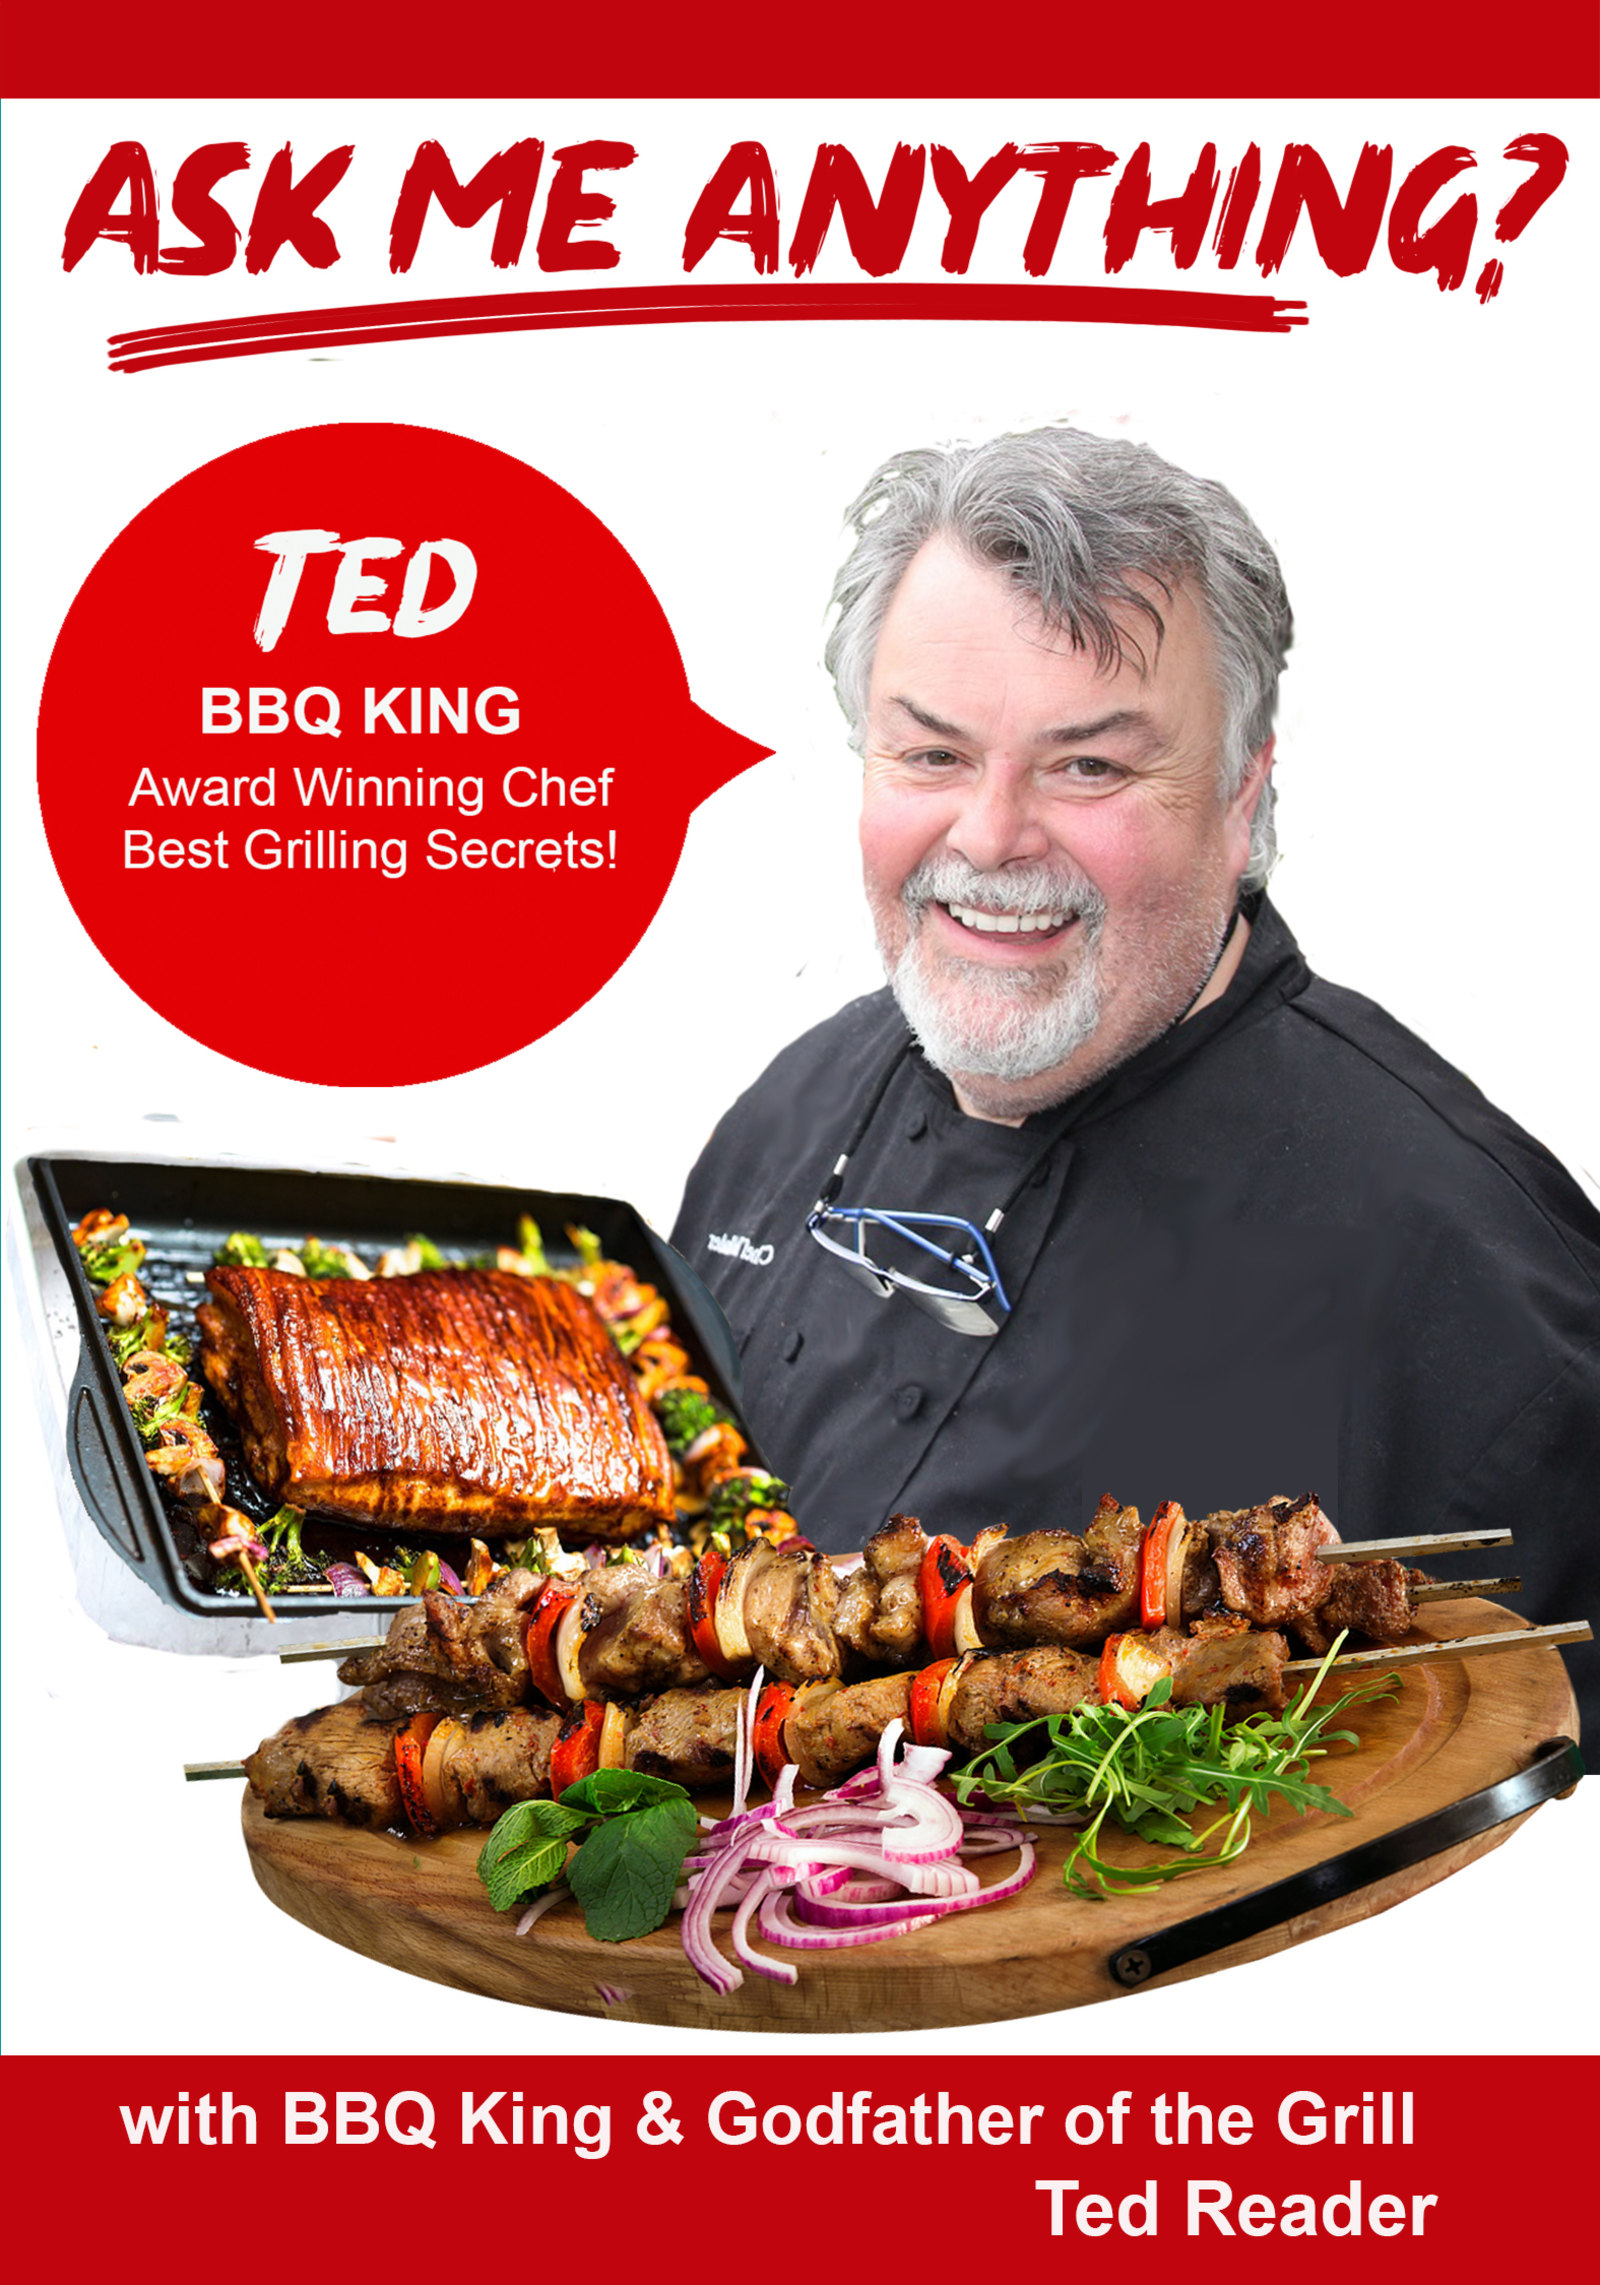 K4837 - Ask Me Anything aobut being a BBQ King & Godfather of the Grill with Ted Reader